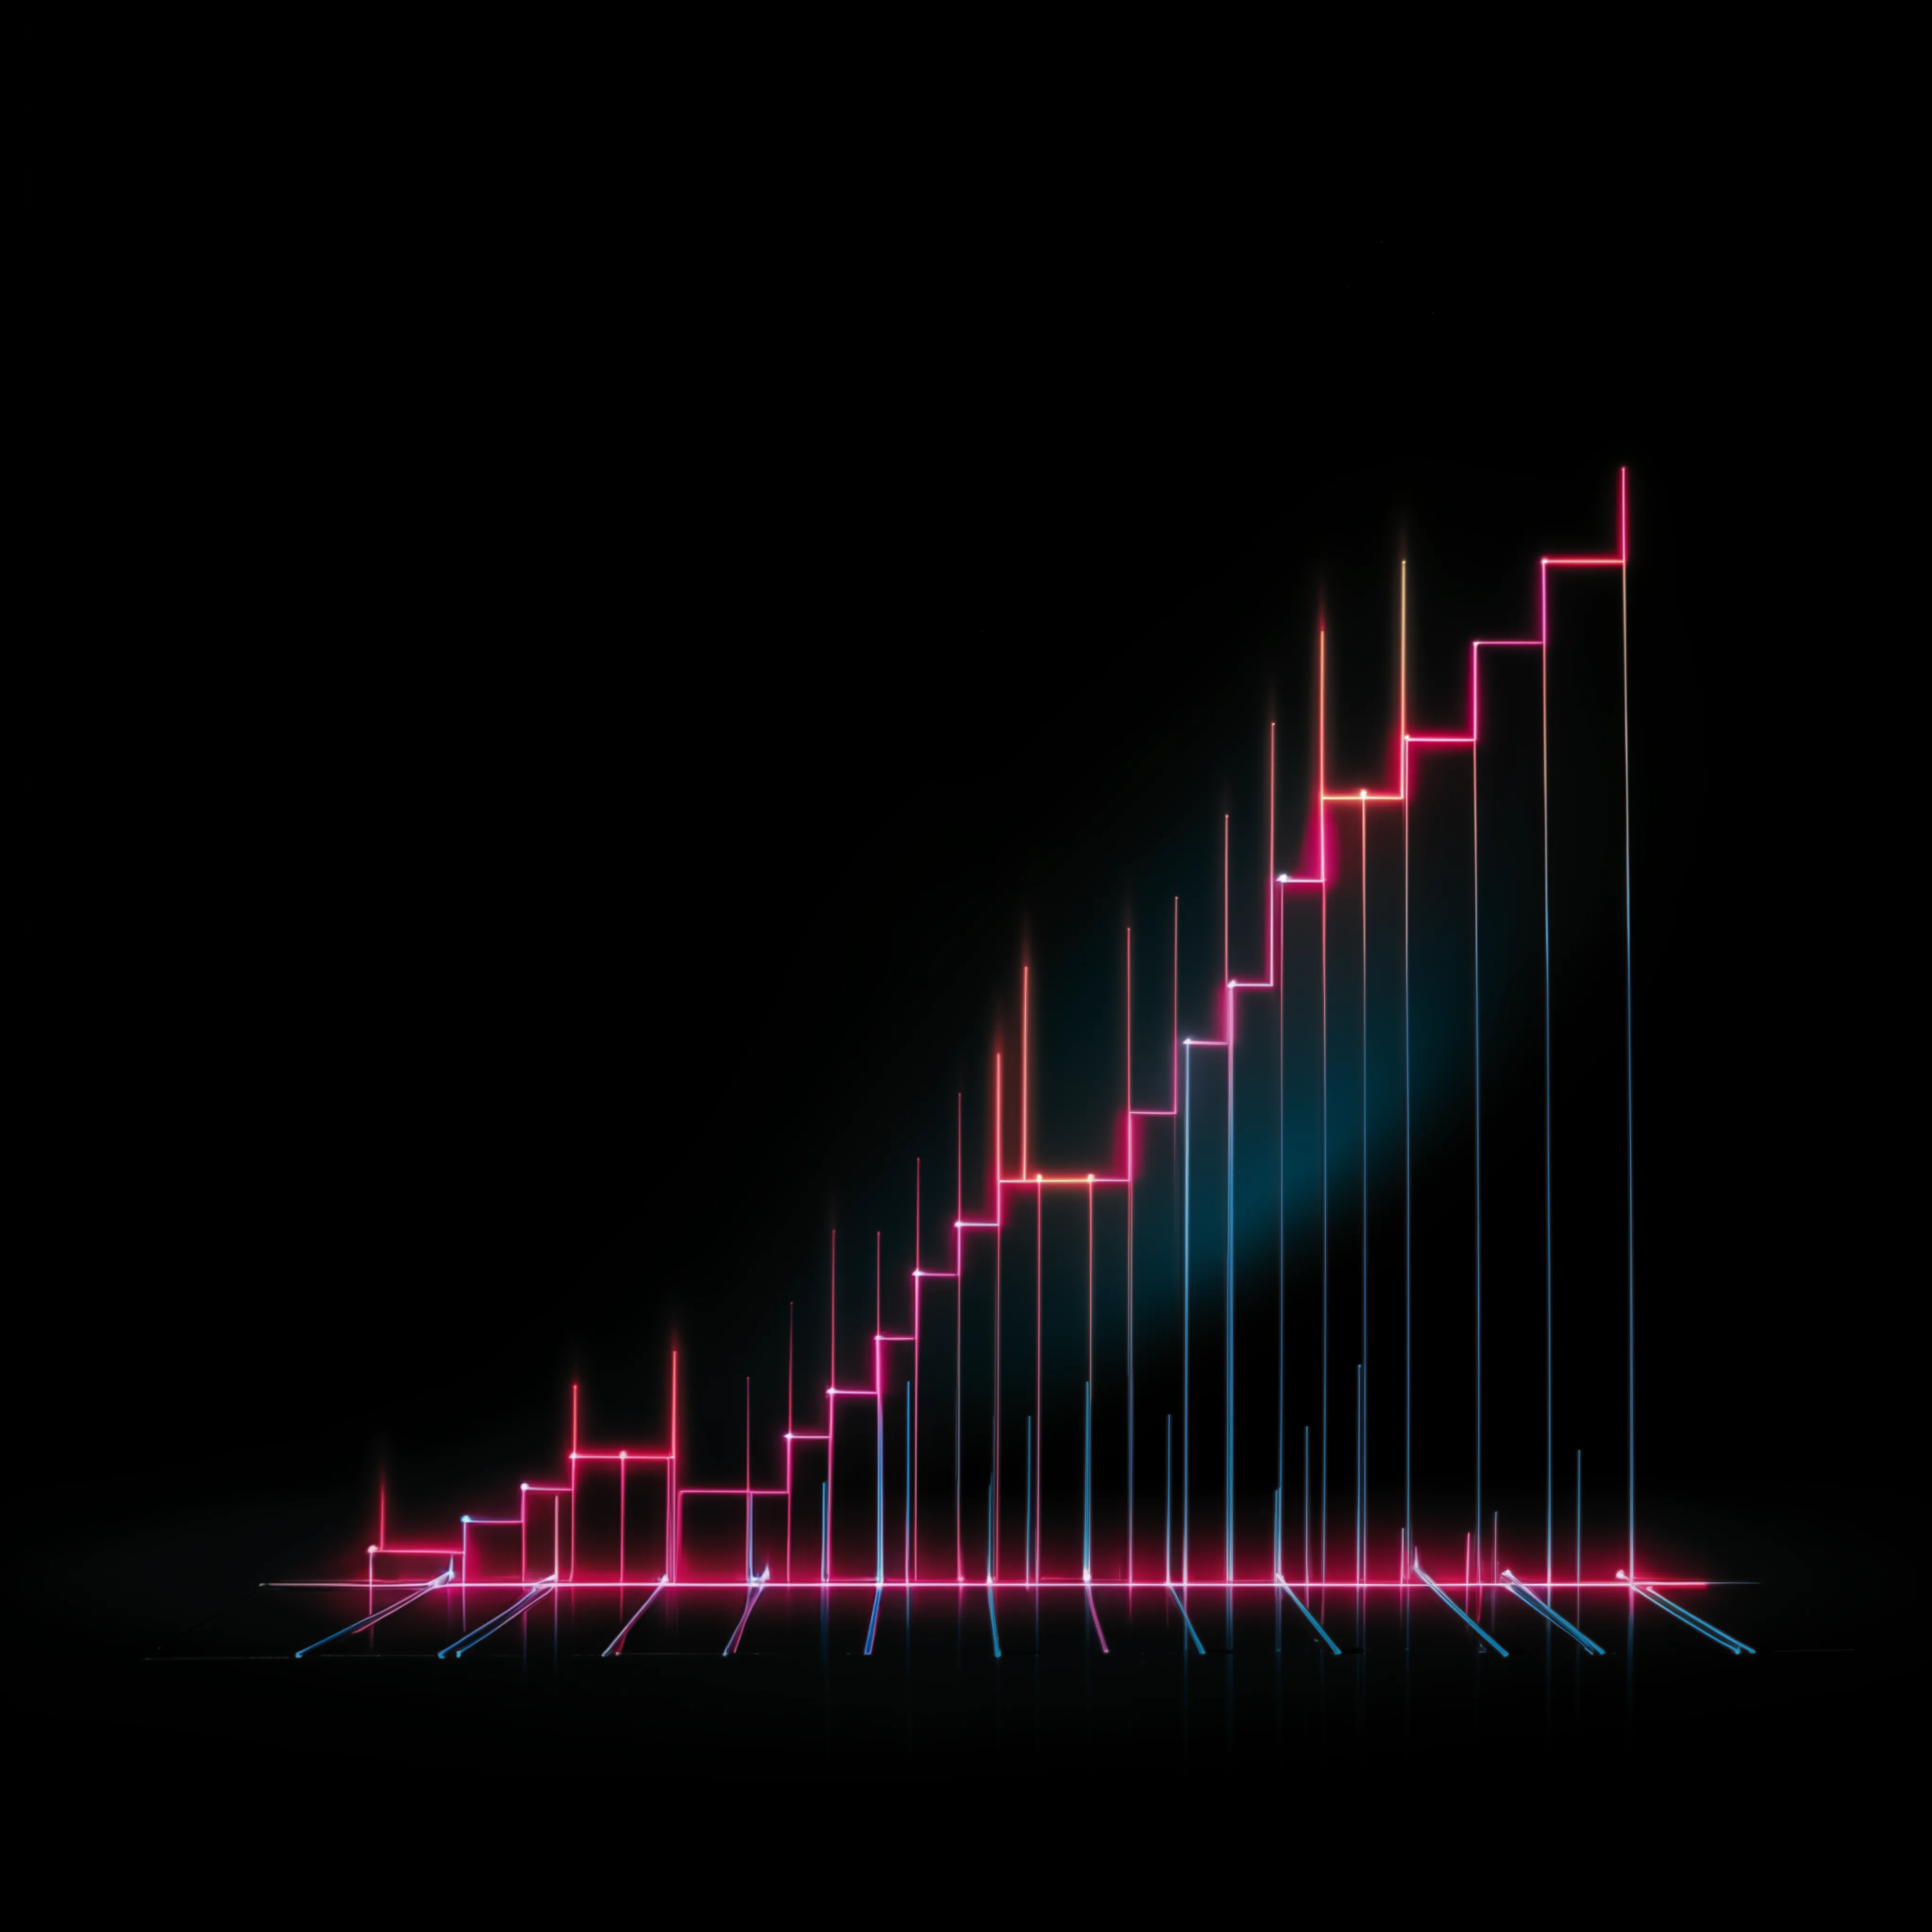 A 3D line graph illuminated by neon lights, presented on a dark background.